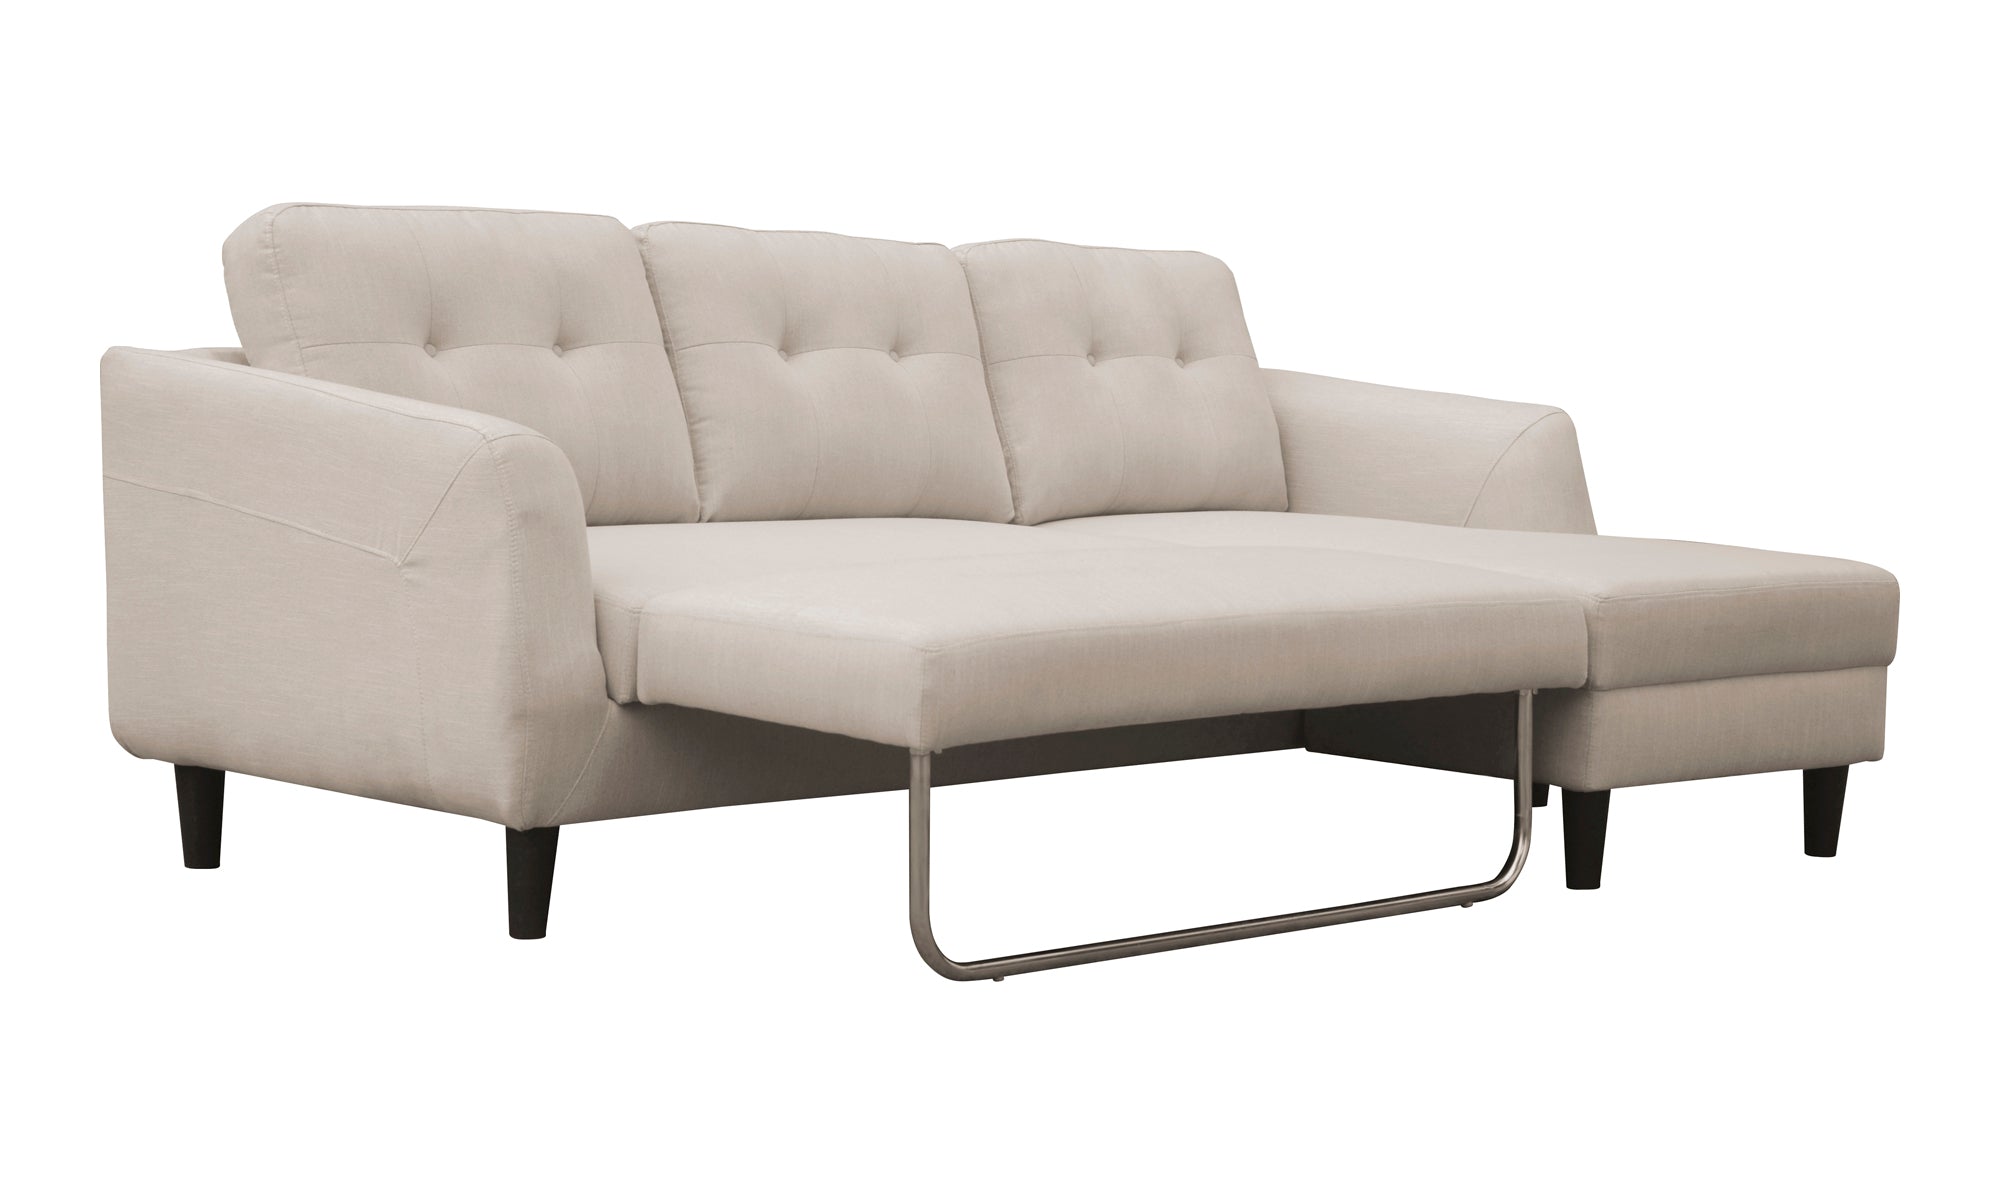 Belagio Right Facing Sofa Bed With Chaise - Beige